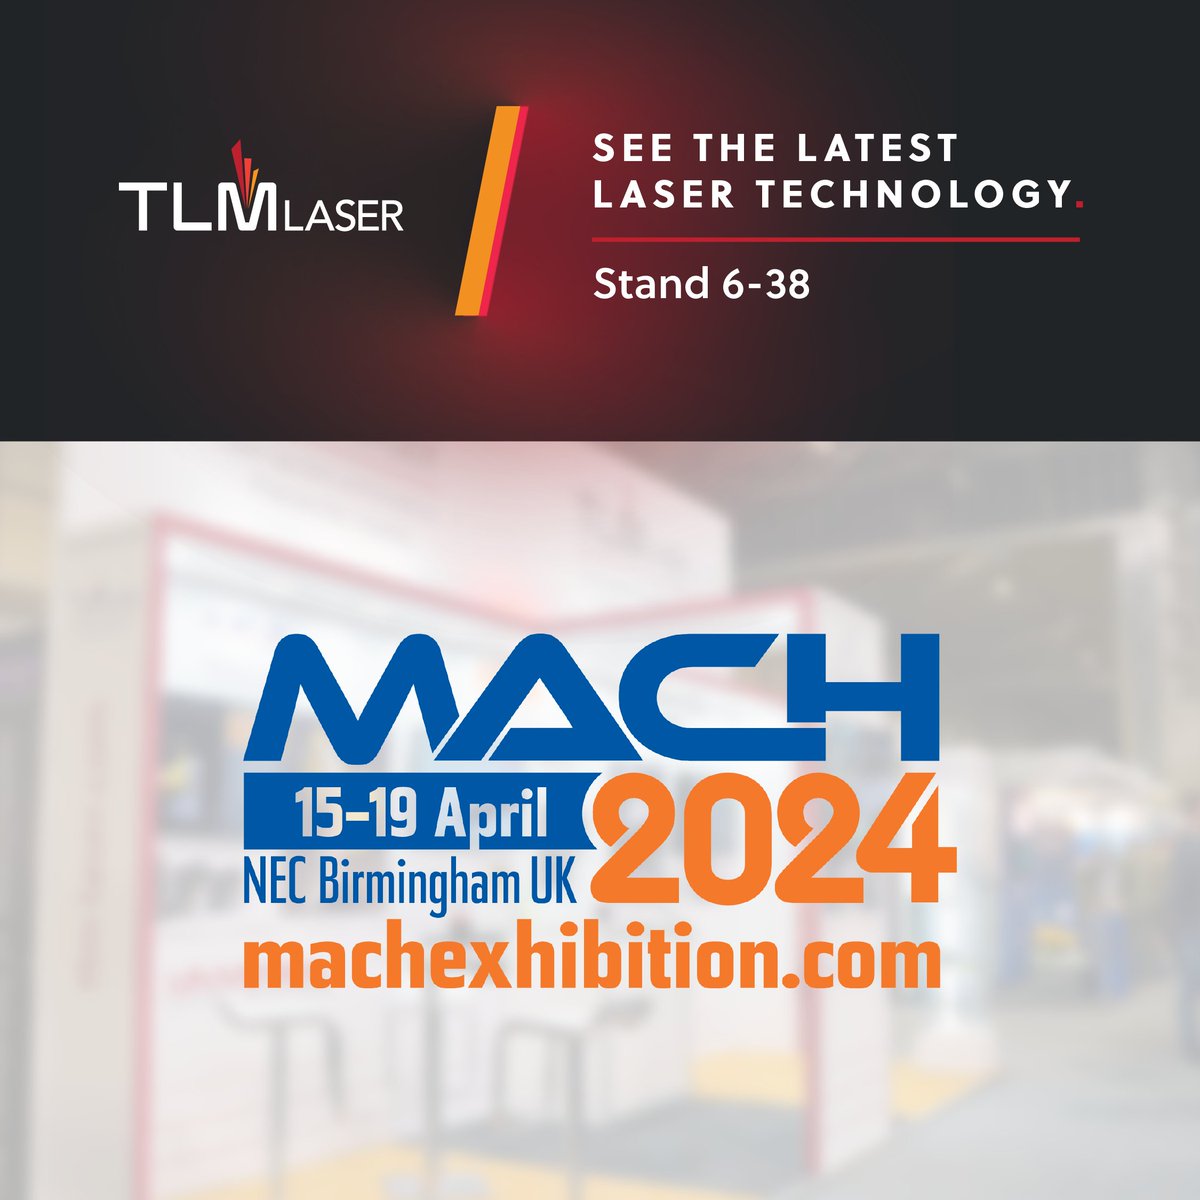 Join us at MACH Exhibition, April 15th-19th at NEC Birmingham! 🚀

Visit us at Stand 6-38 to explore the latest laser technology, network with industry experts, and enter our prize giveaway 🎁

Register for tickets here 👉 register.visitcloud.com/survey/0pqjcdd…

#MACH2024 #LaserTechnology